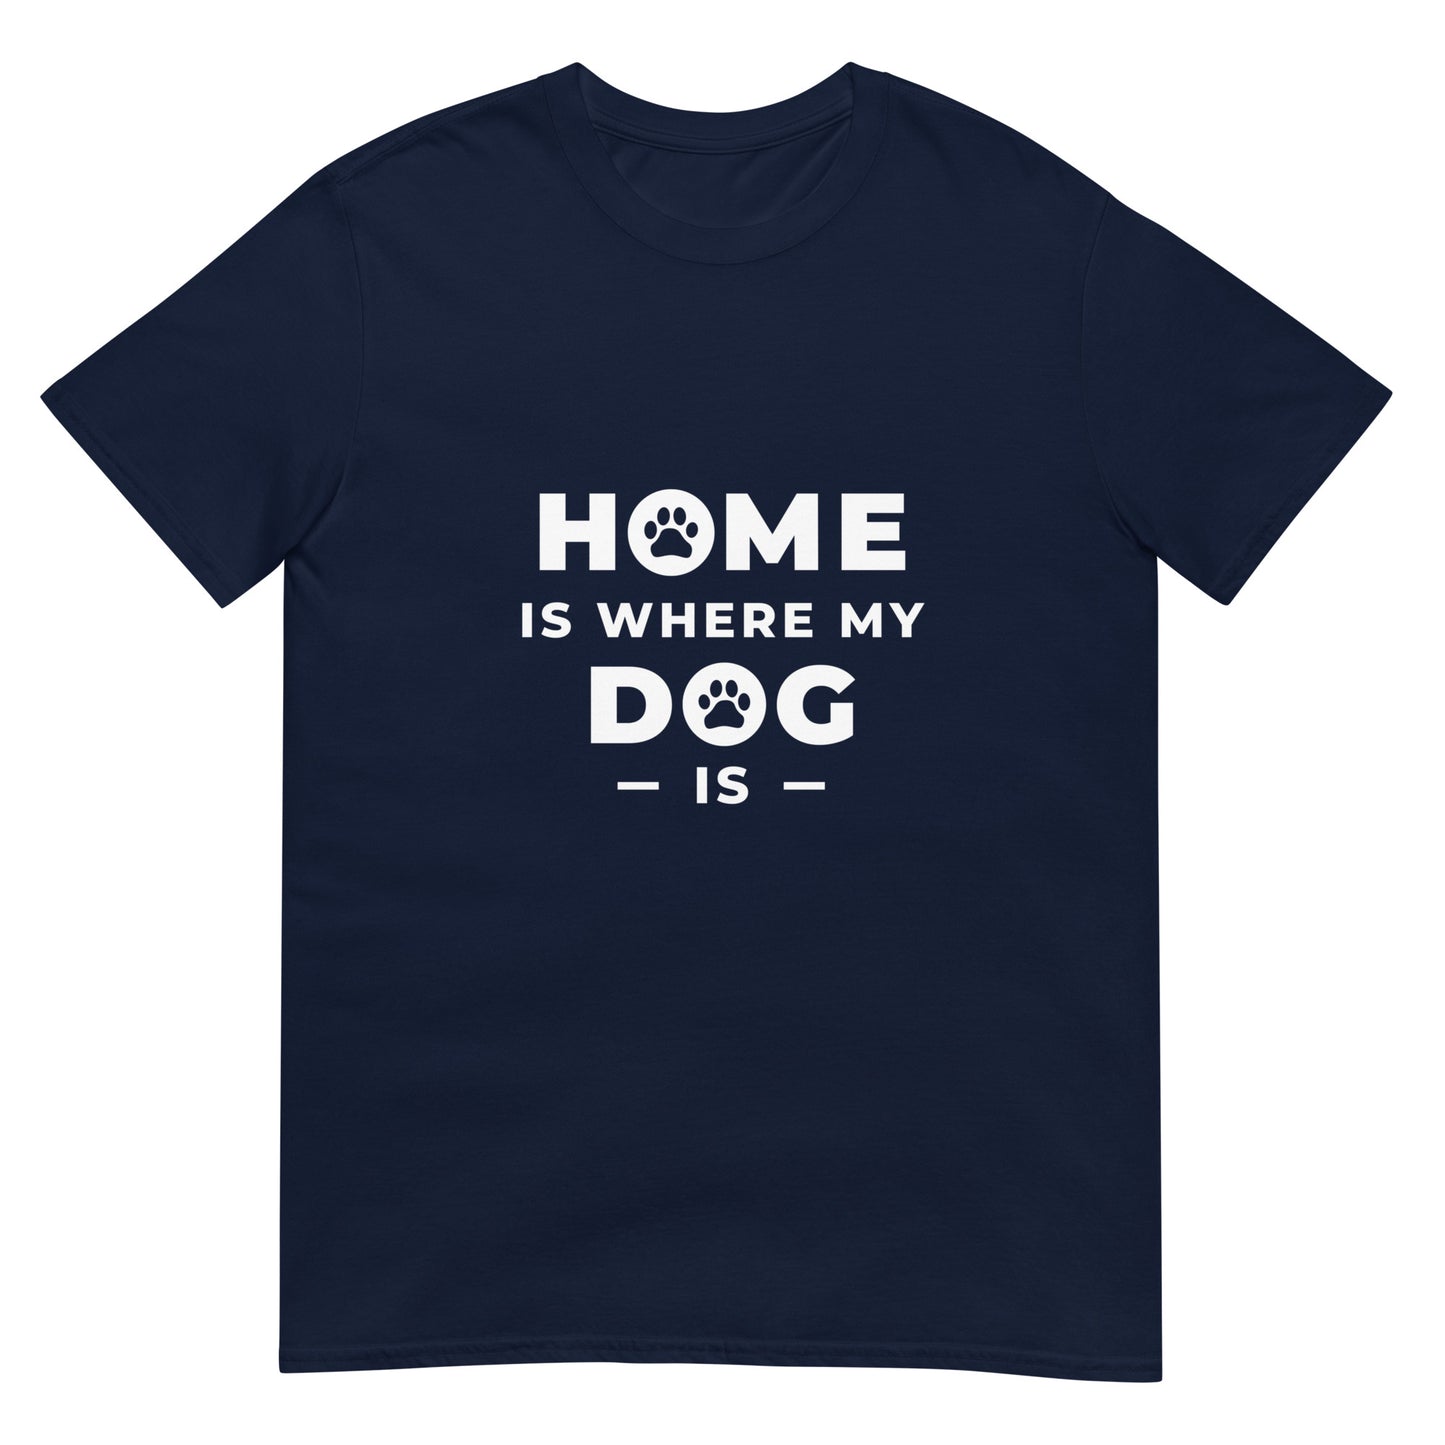 Home Is Where My Dog Is Unisex T-Shirt